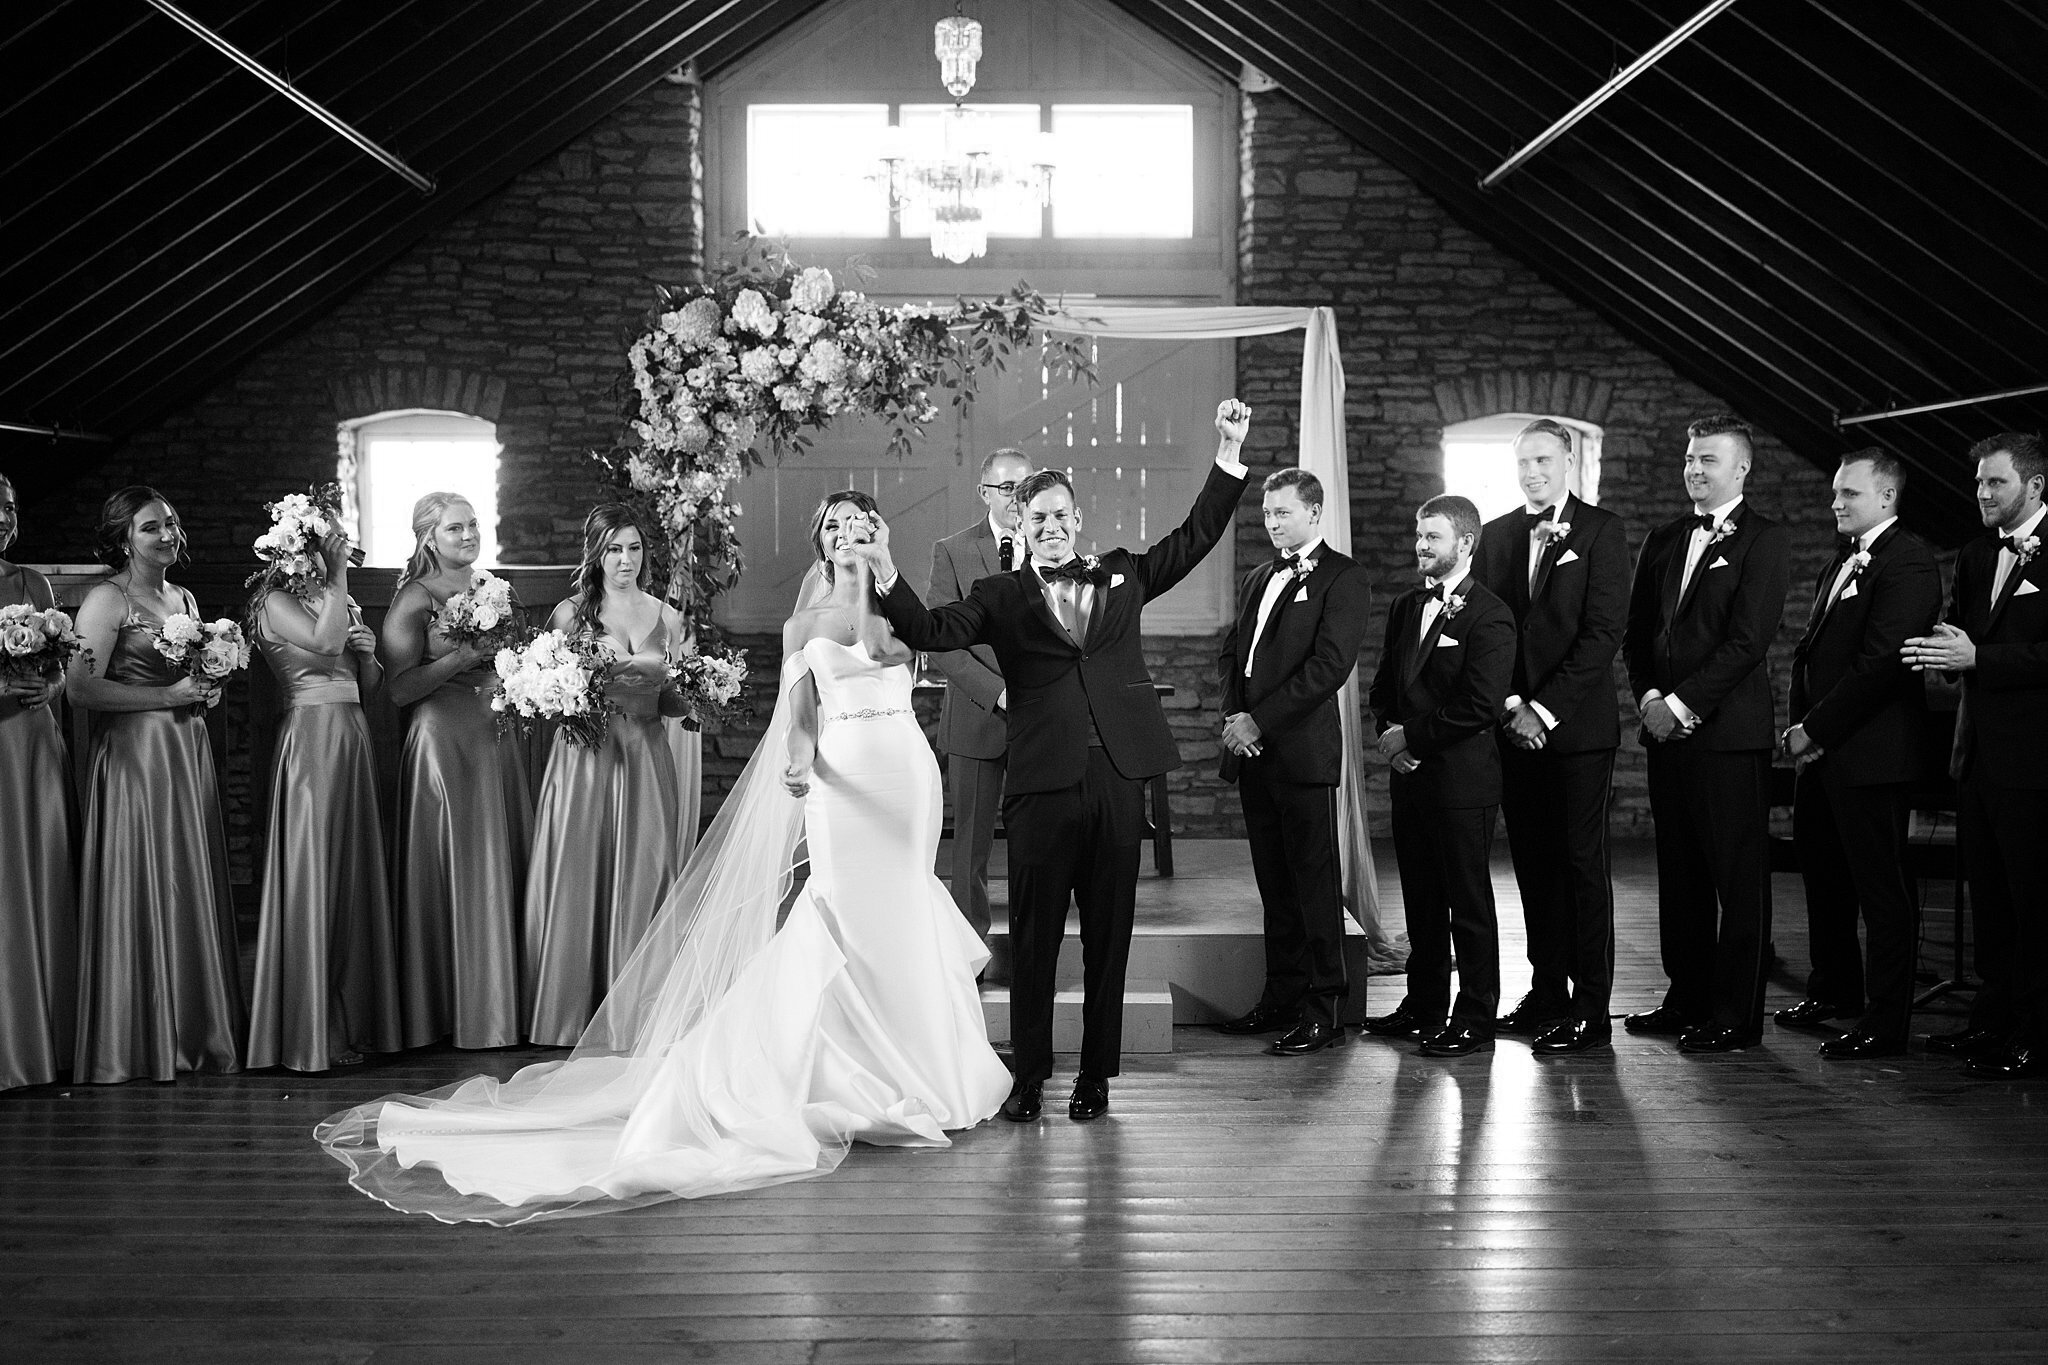  Bride and groom celebrate husband and wife for first time at Mayowood Stone Barn. 